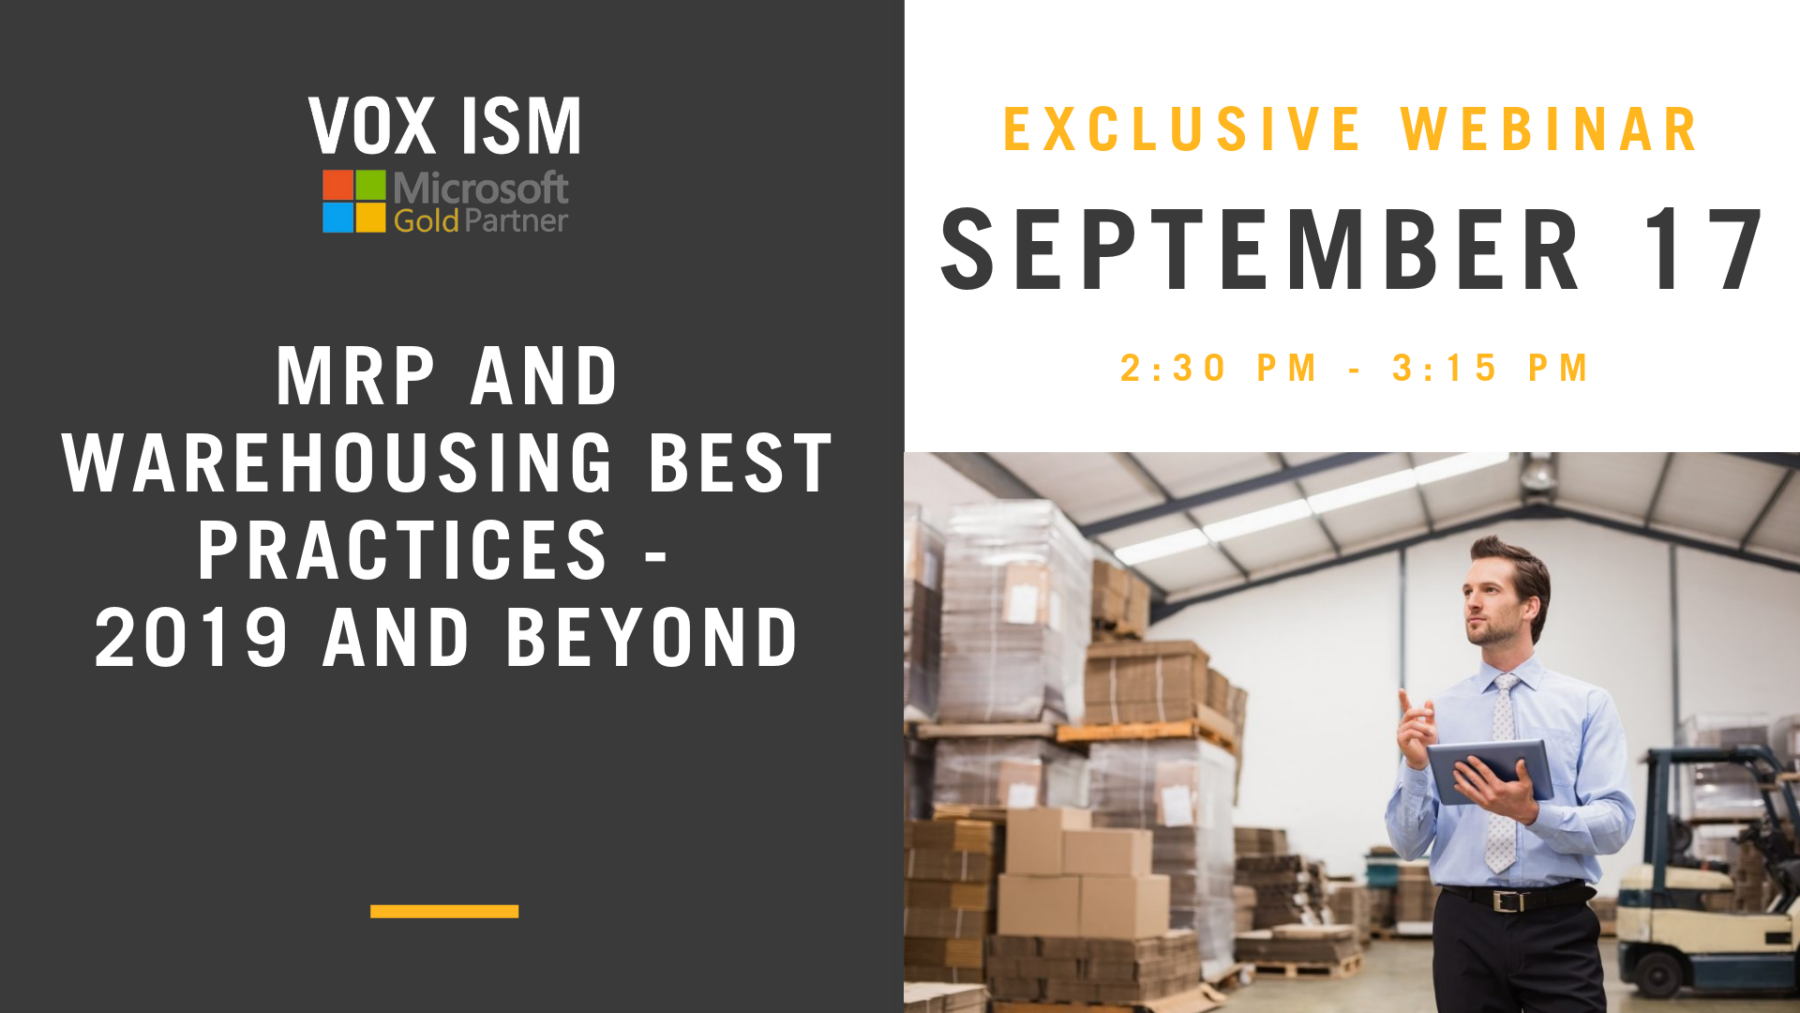 MRP and Warehousing Best Practices - 2019 and Beyond - September 17 - Webinar - VOX ISM